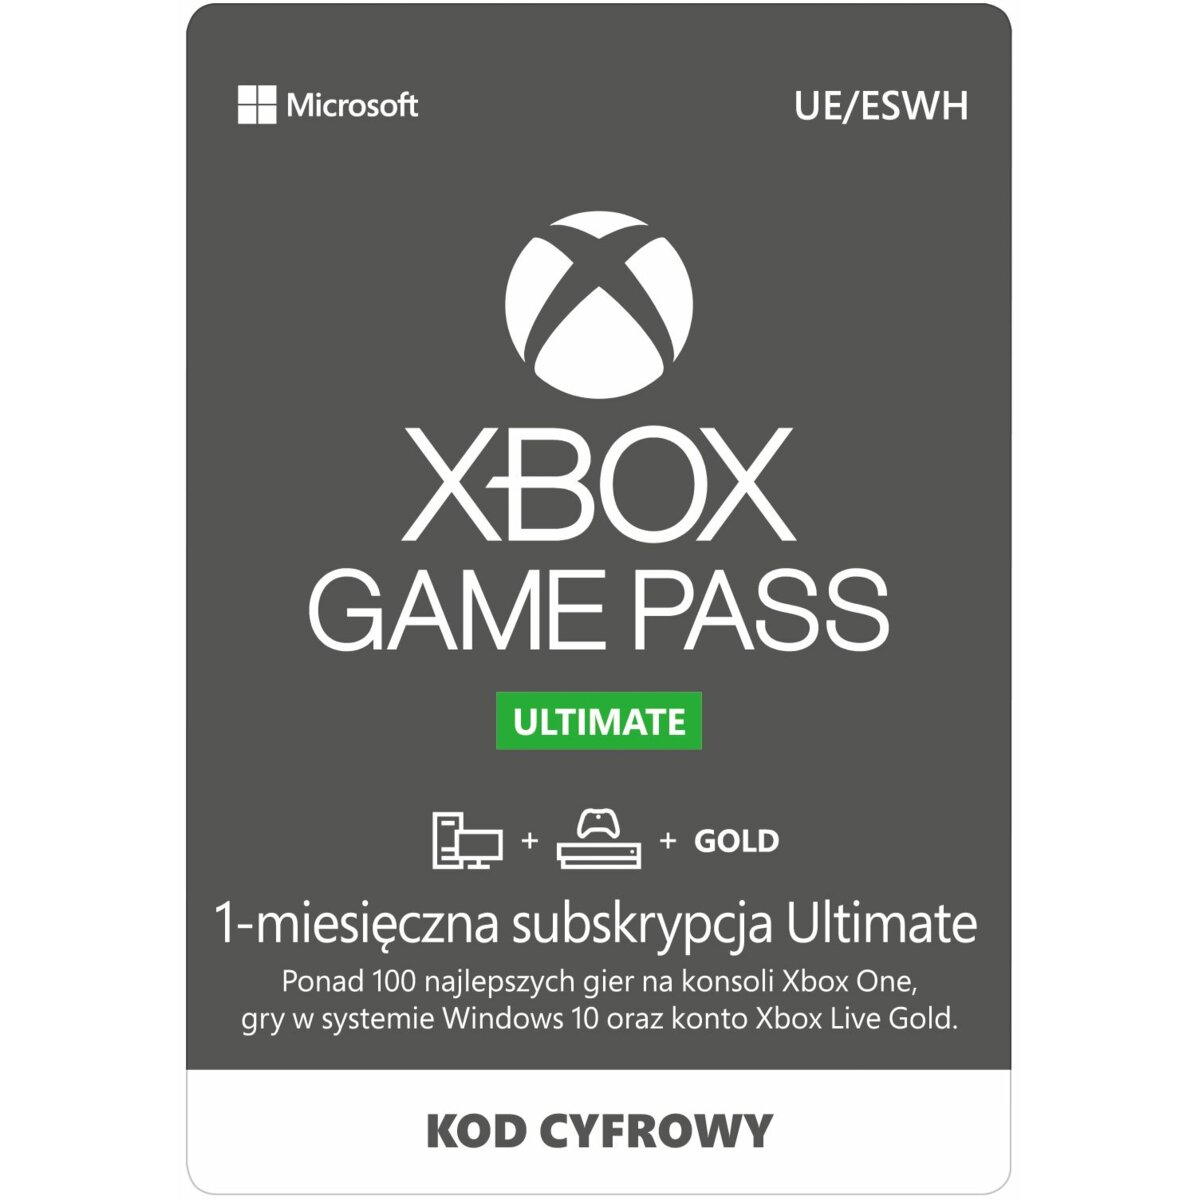 xbox game pass ultimate 1 month price